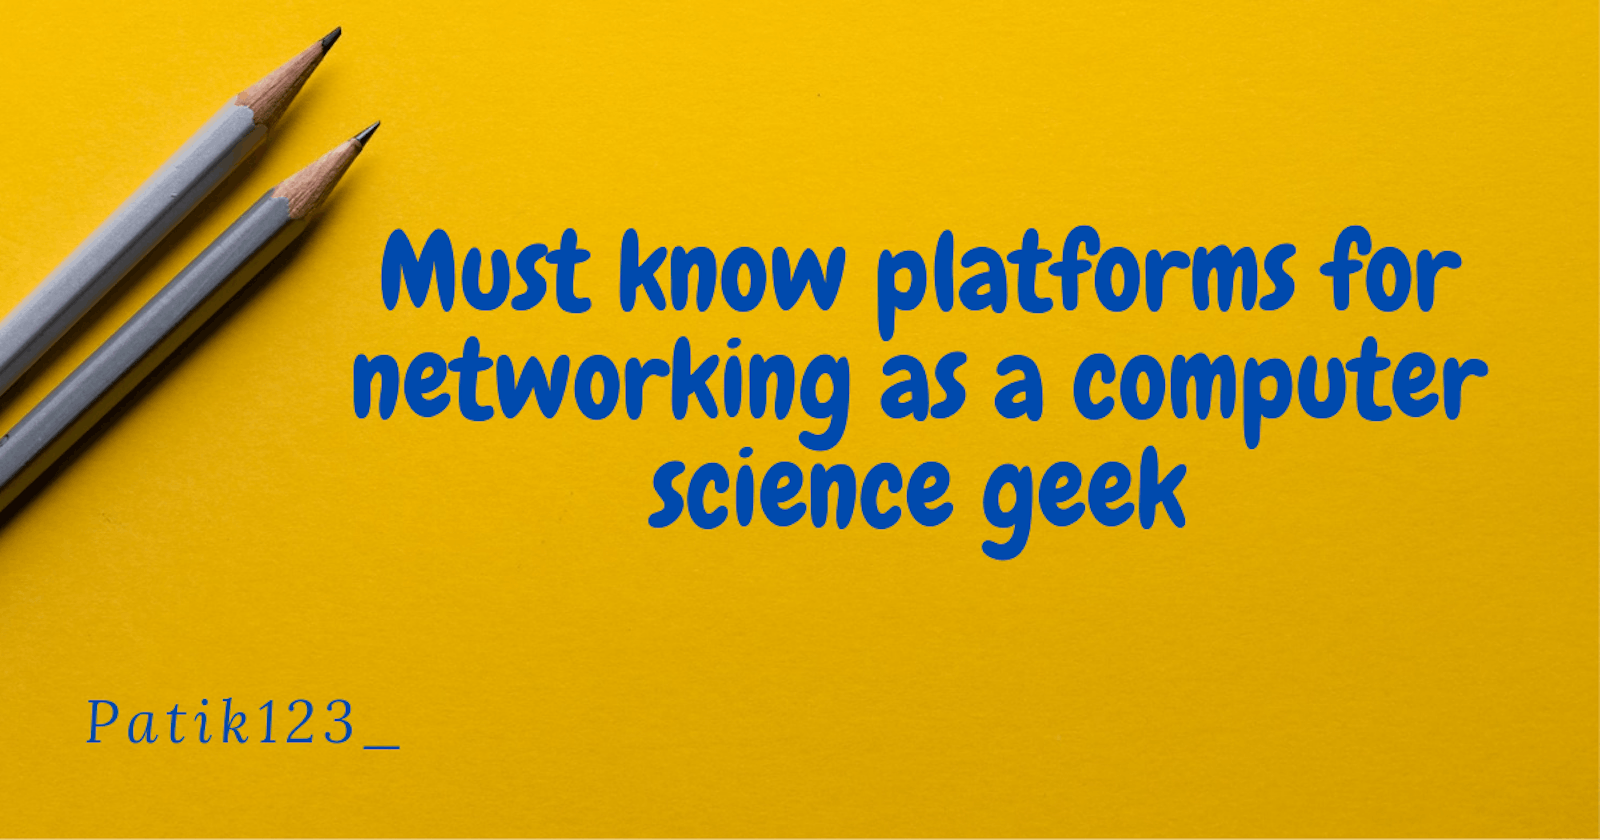 Must know platforms for networking as a computer science geek